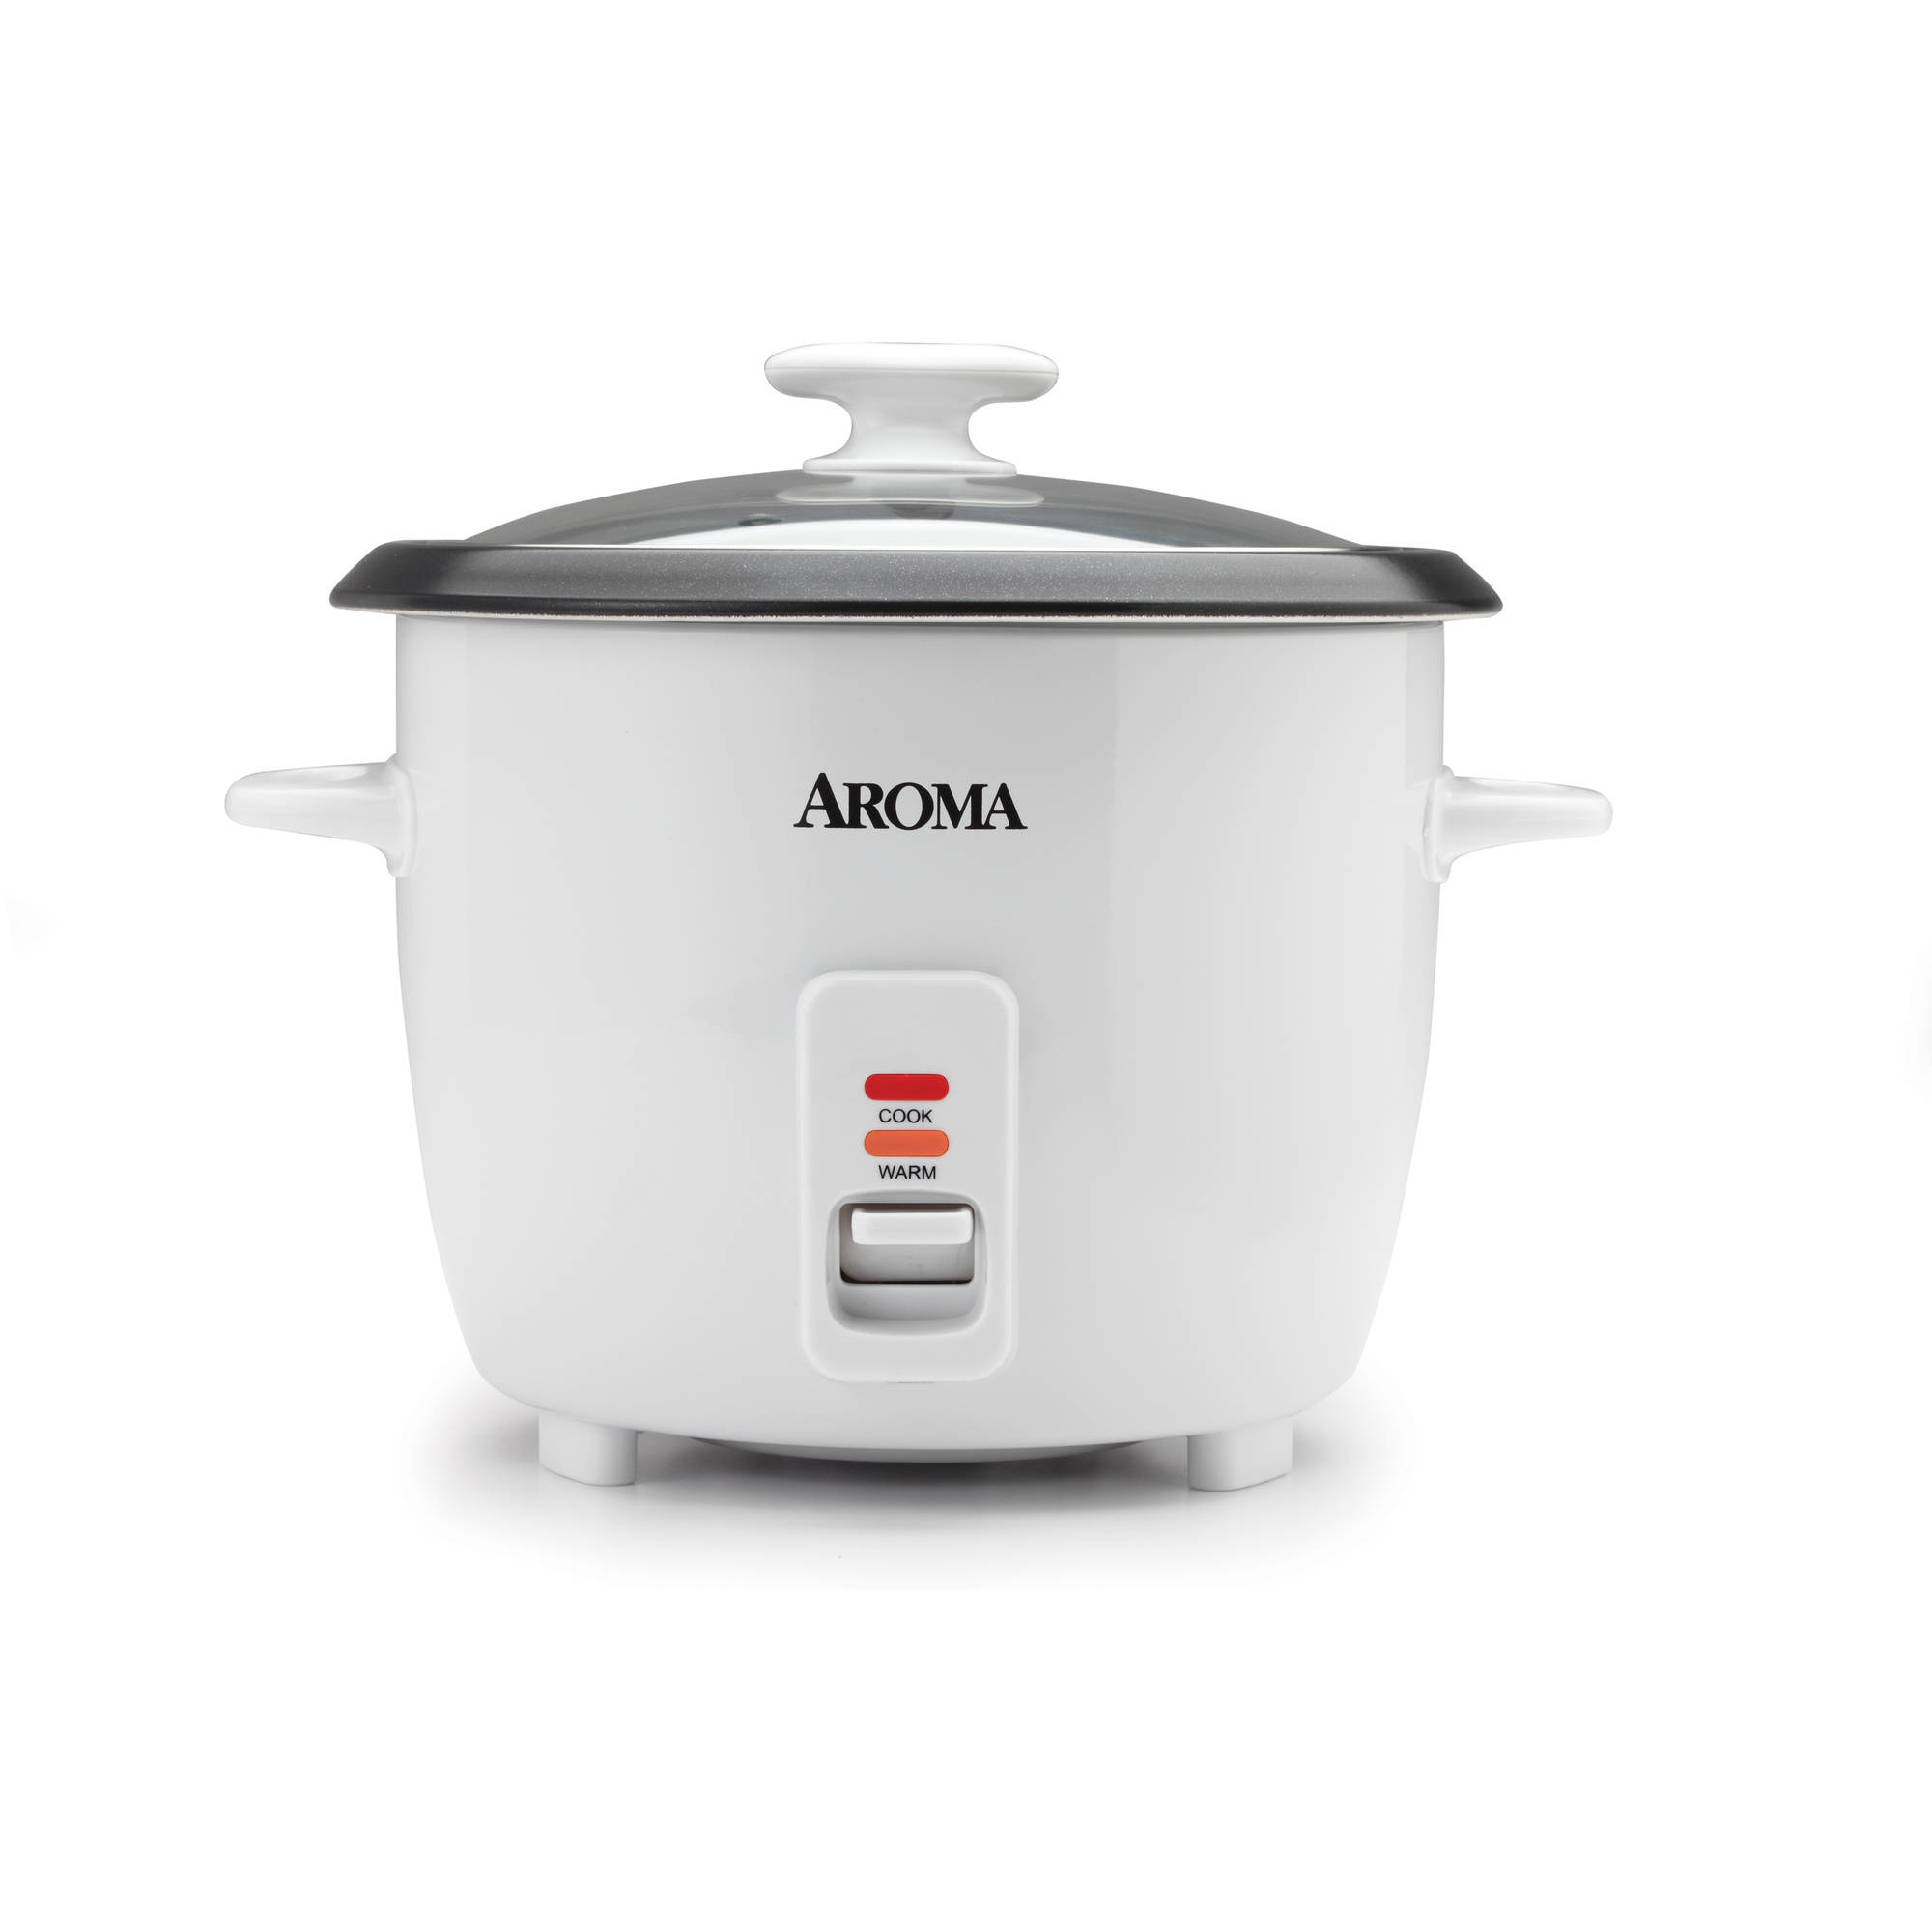 Aroma 14-Cup(cooked)/ 3QT. Pot Rice Cooker, White - image 1 of 3